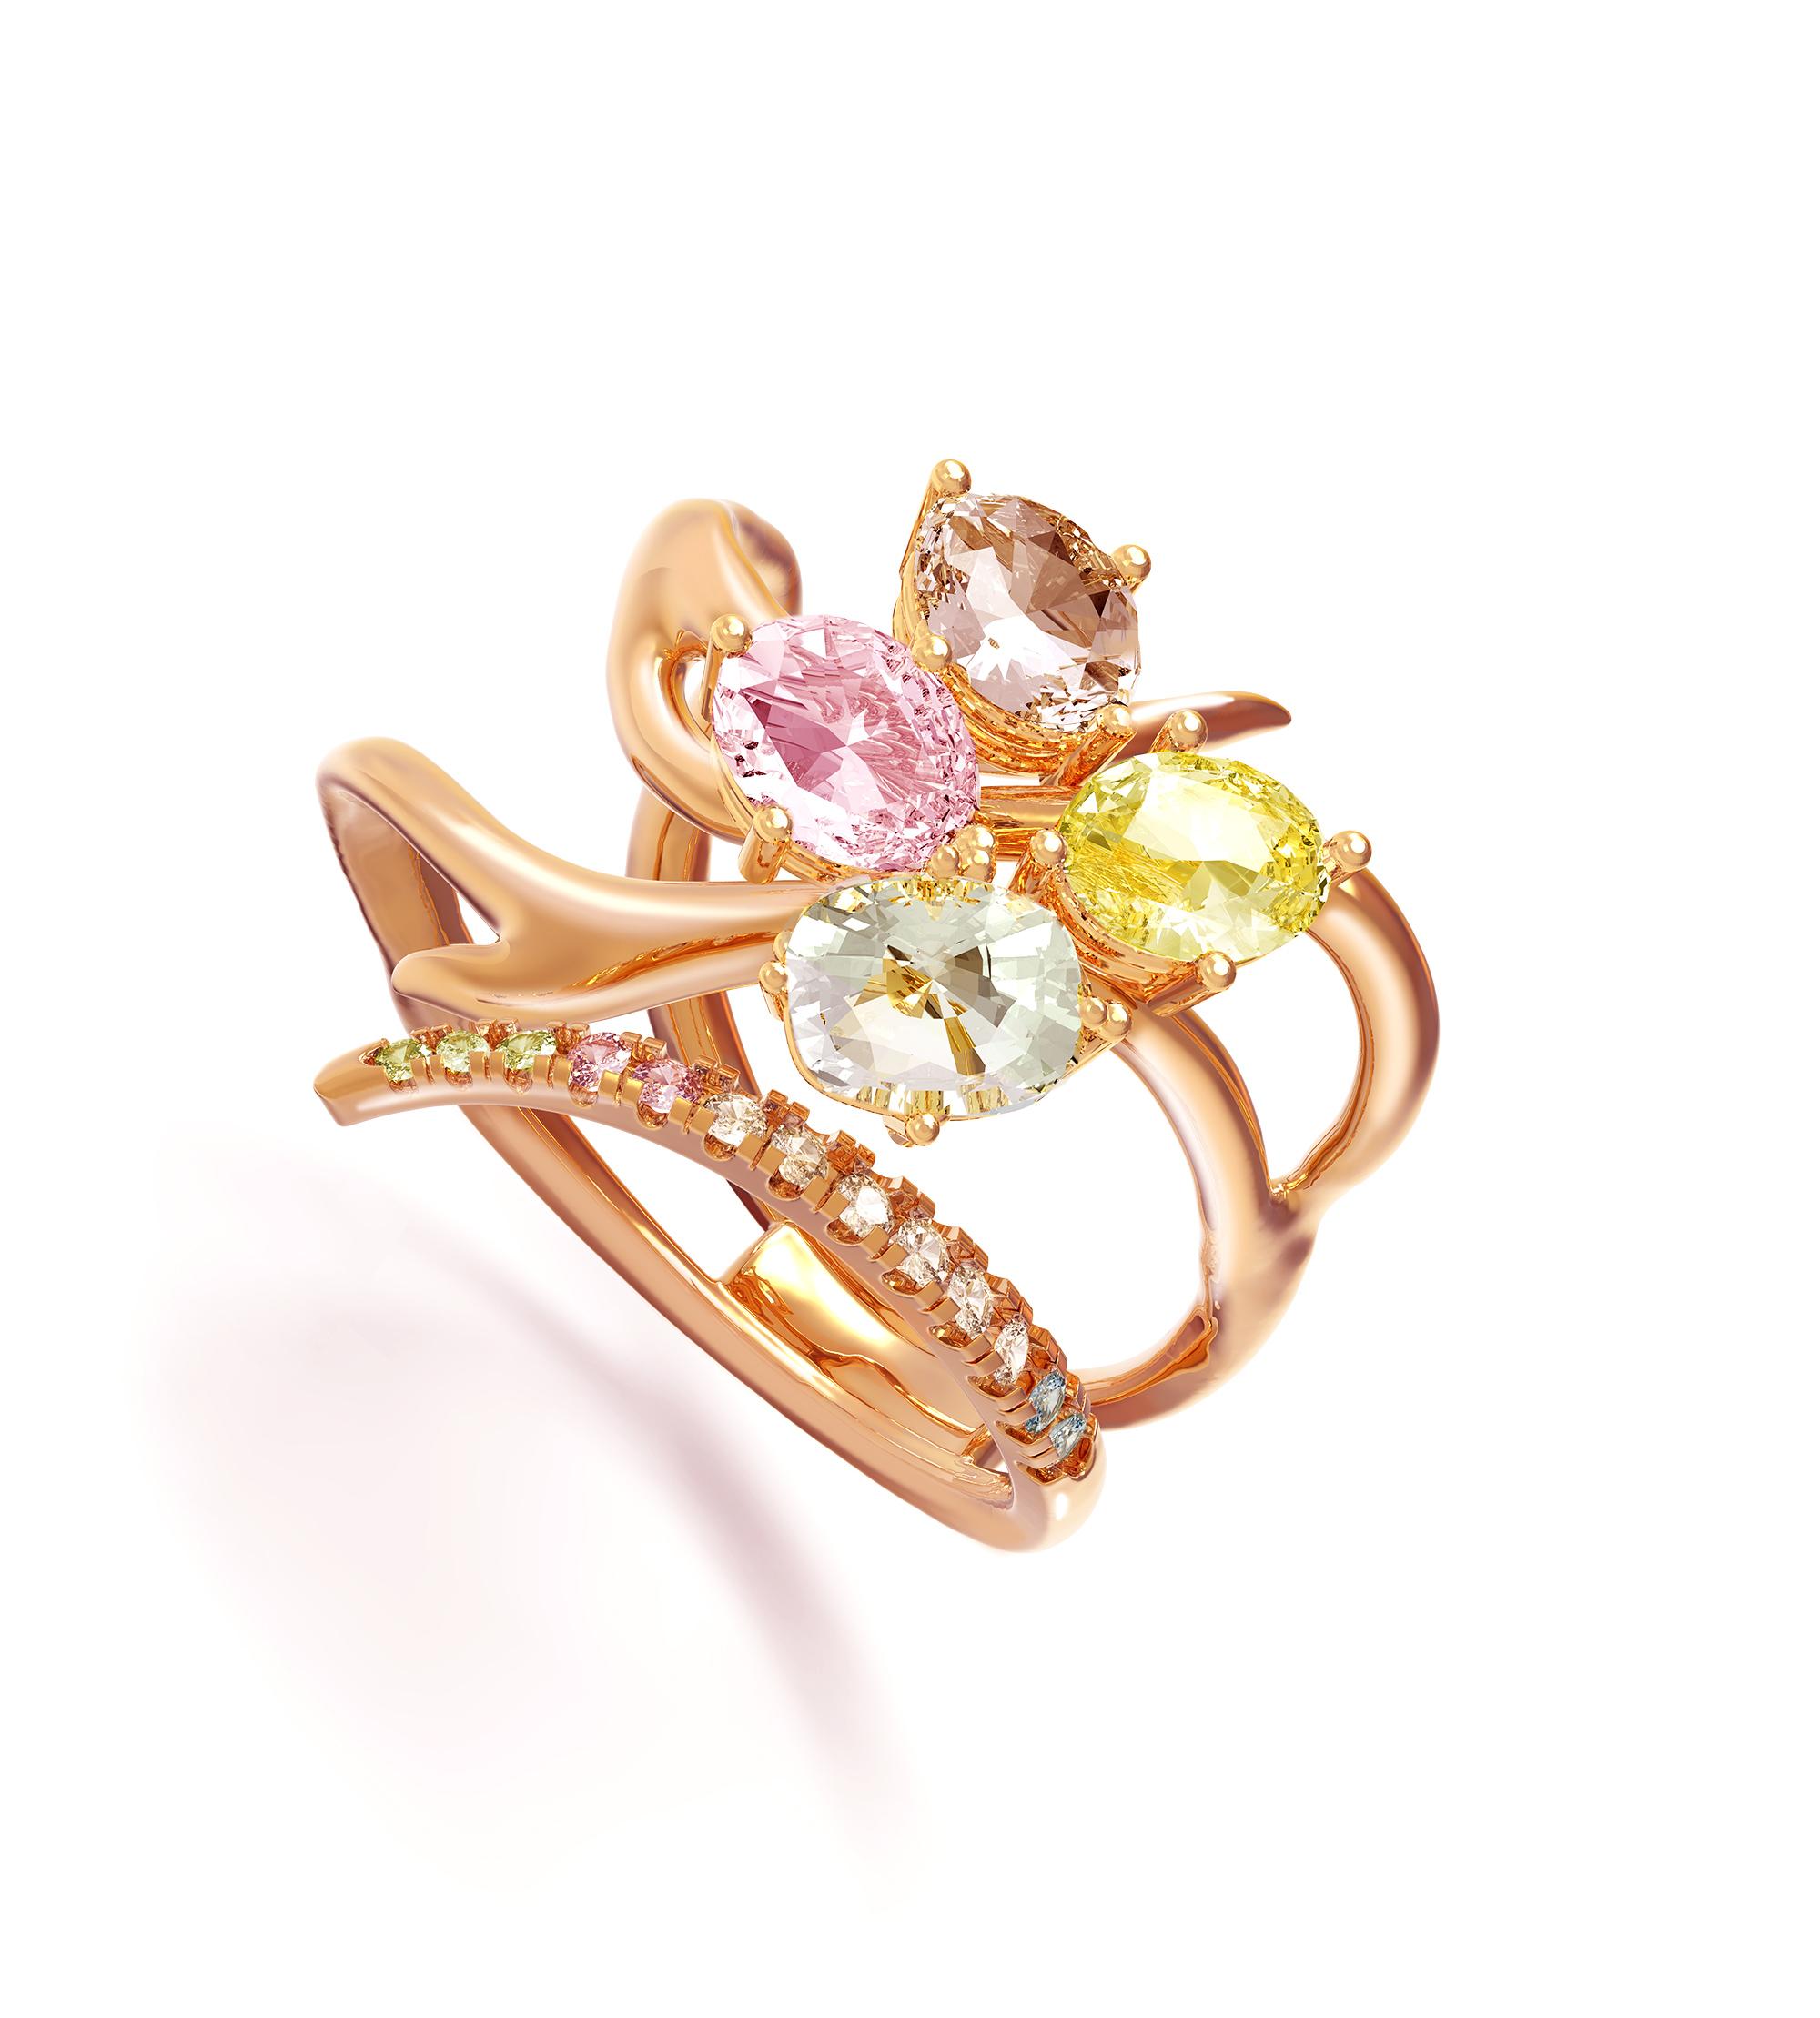 This Harajuku contemporary cocktail cluster ring is made of 18 karat rose gold with natural gems on your choice custom made.
The matching gems are:
Oval cut pink sapphire, 1,7 carats;
Unheated untreated yellow sapphire in oval cut, 1,61